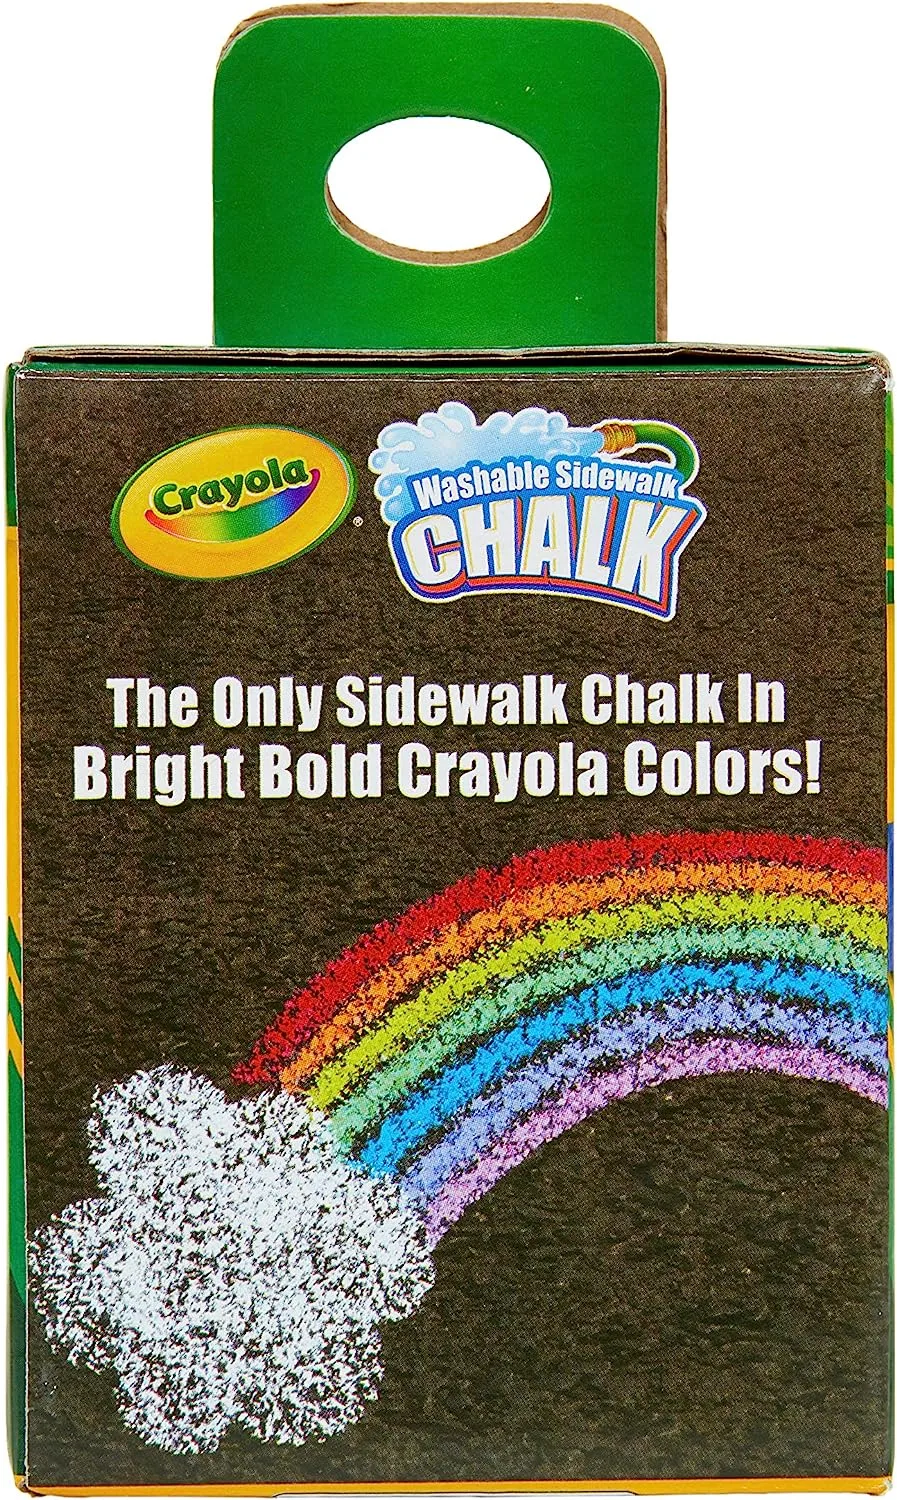 Crayola Colored Chalk Sticks 12 Count - 2 Packs